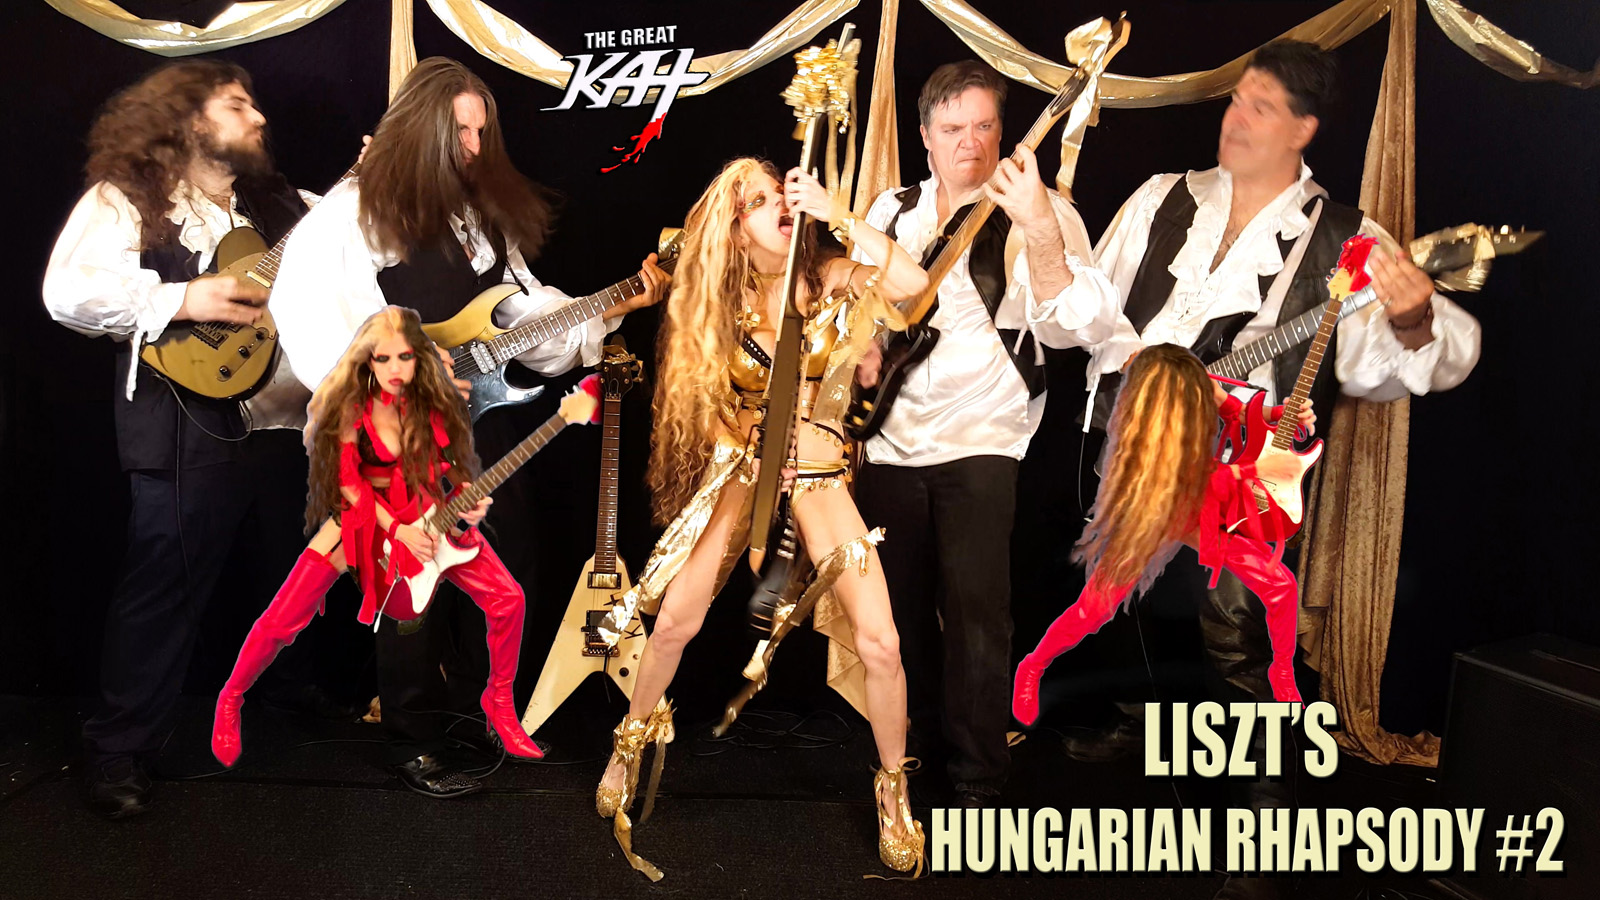 HOT SHRED LICKS! KAT SHREDS with ALL-MALE HUNK BAND! From The Great Kat's LISZT'S "HUNGARIAN RHAPSODY #2" MUSIC VIDEO!